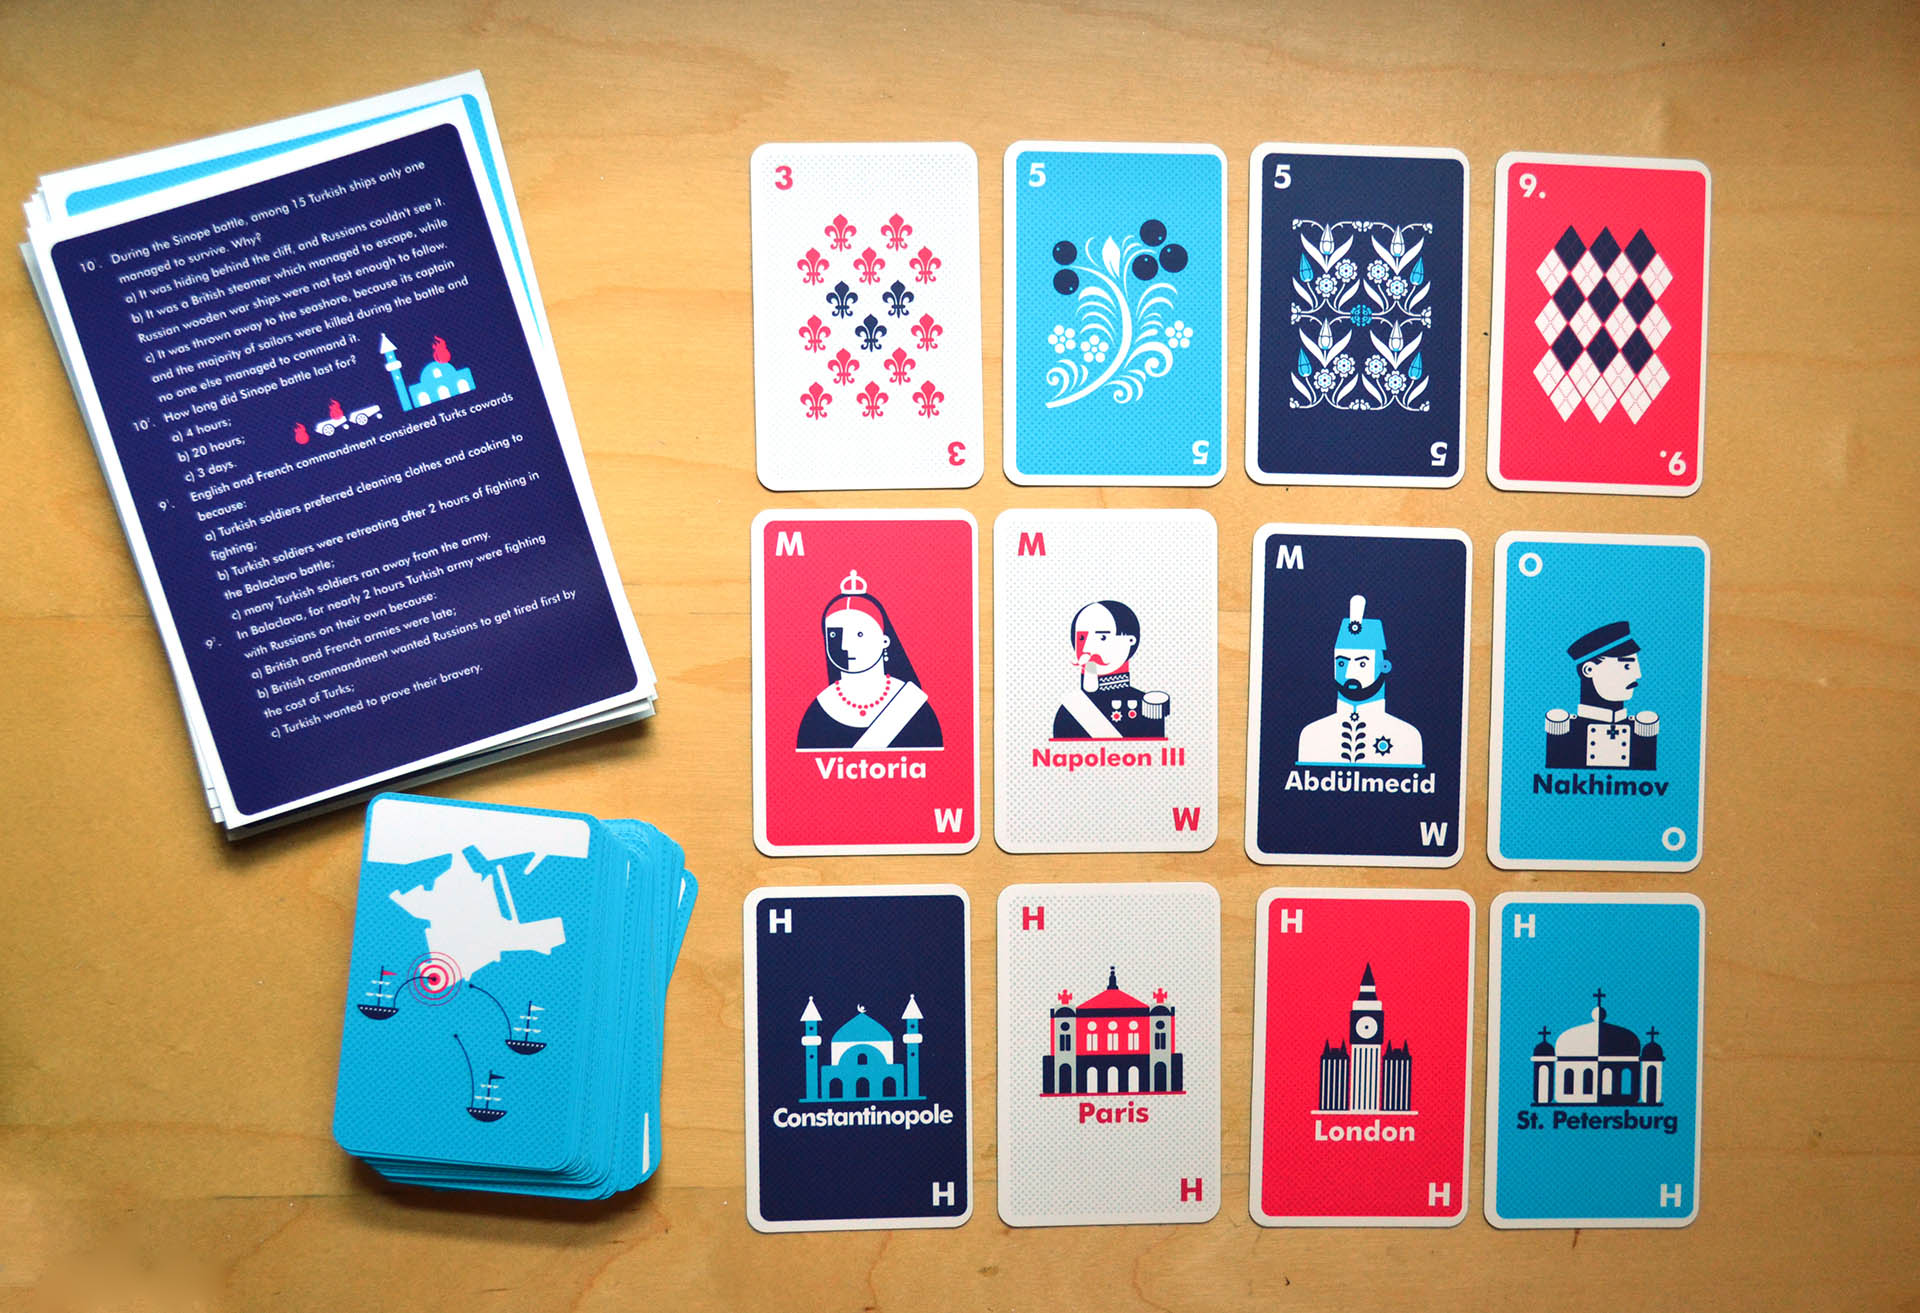 The deck of cards features personalities of Russian, British, Ottoman and Second French Empires of 1853-56